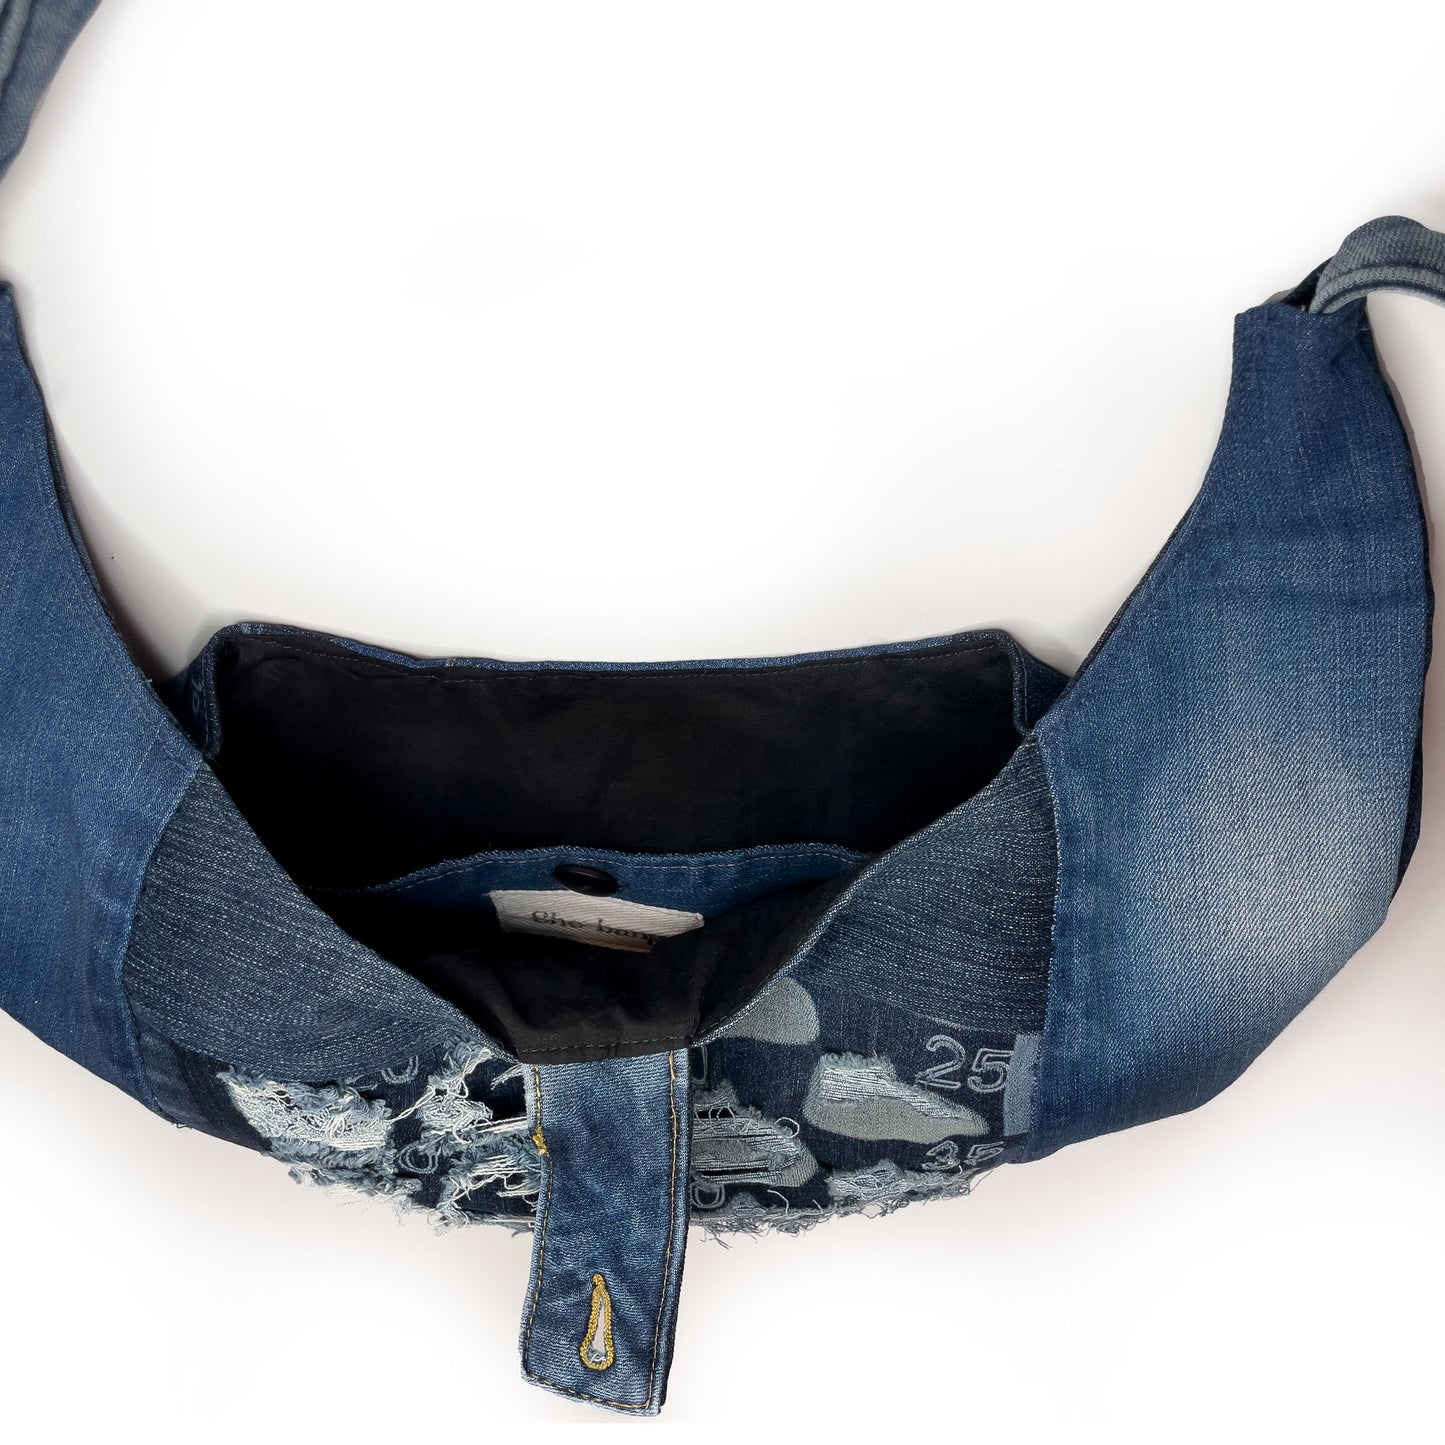 Denim Slouch bag in Indigo. handmade unique handbags, recycled denim bags, handmade genuine leather bags, completely one of a kind bags made by local brooklyn designers.